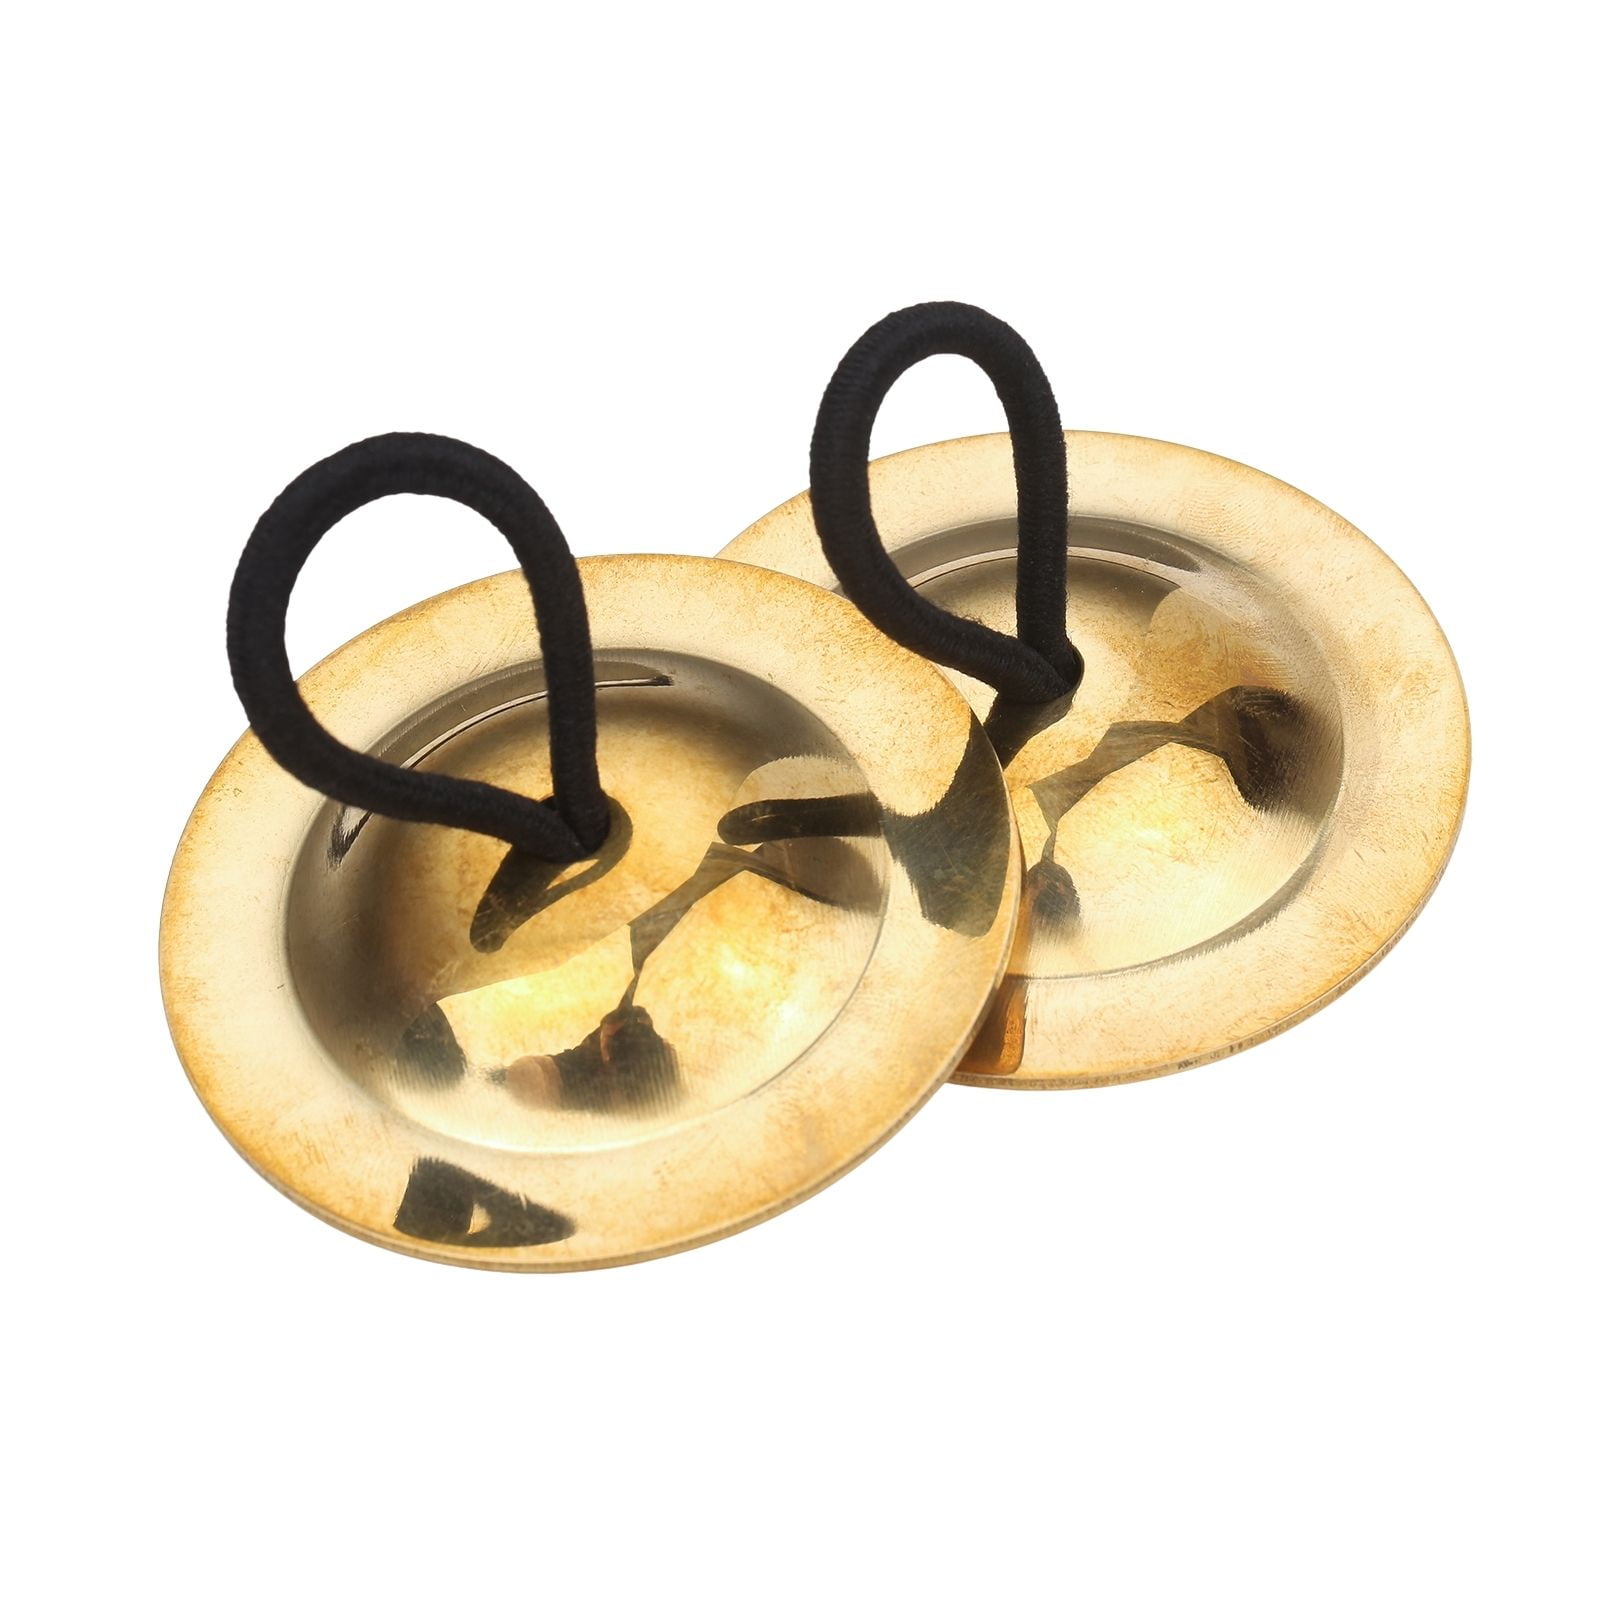 ManFull 1 Pair Metal Finger Cymbals Belly Rhythm Musical Instrument Percussion Kids 